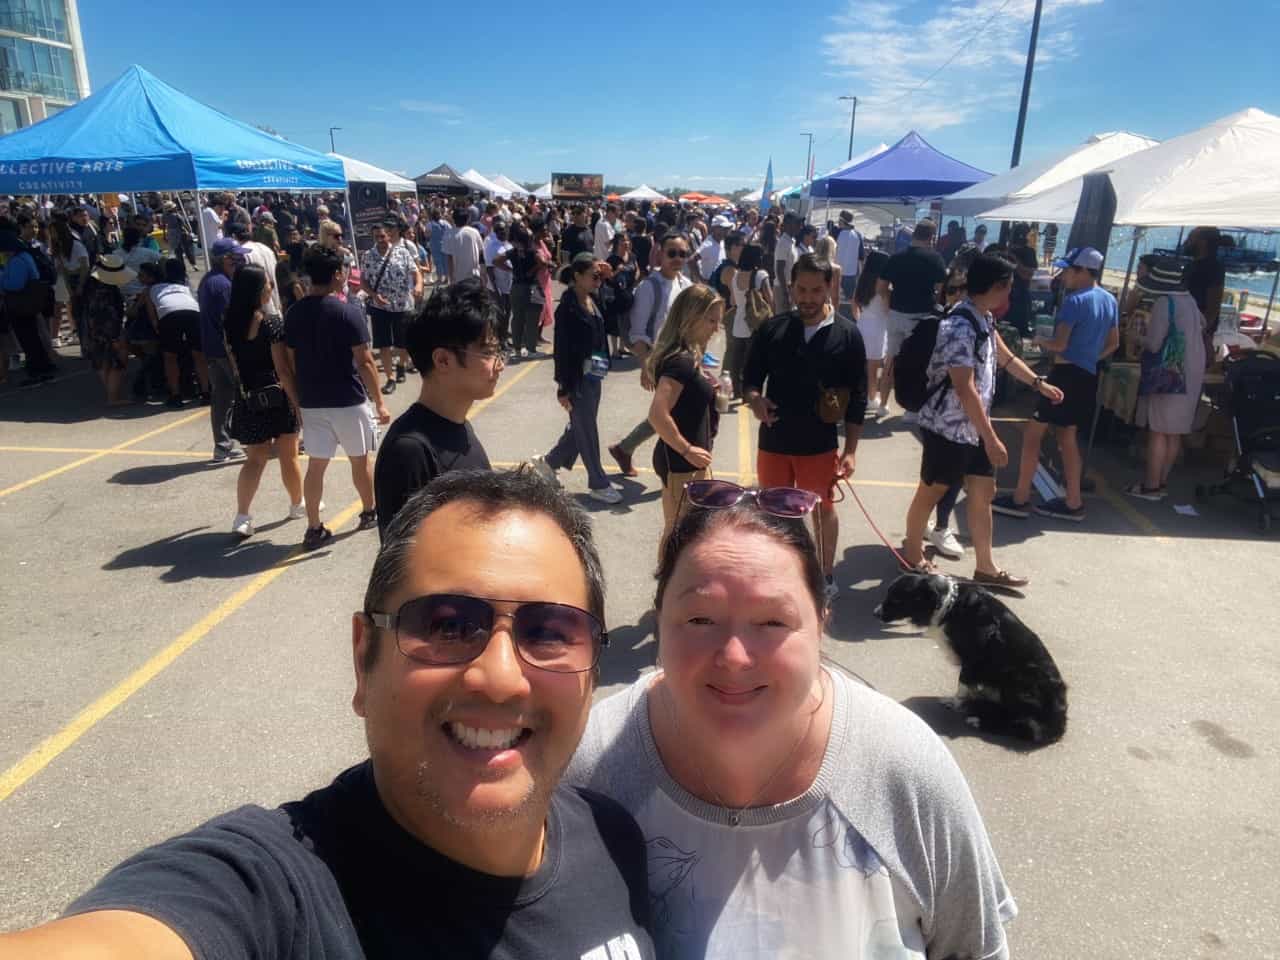 Smorgasburg Toronto 2022 - Checking out the market with my foodie hubby, Chef Jeff.